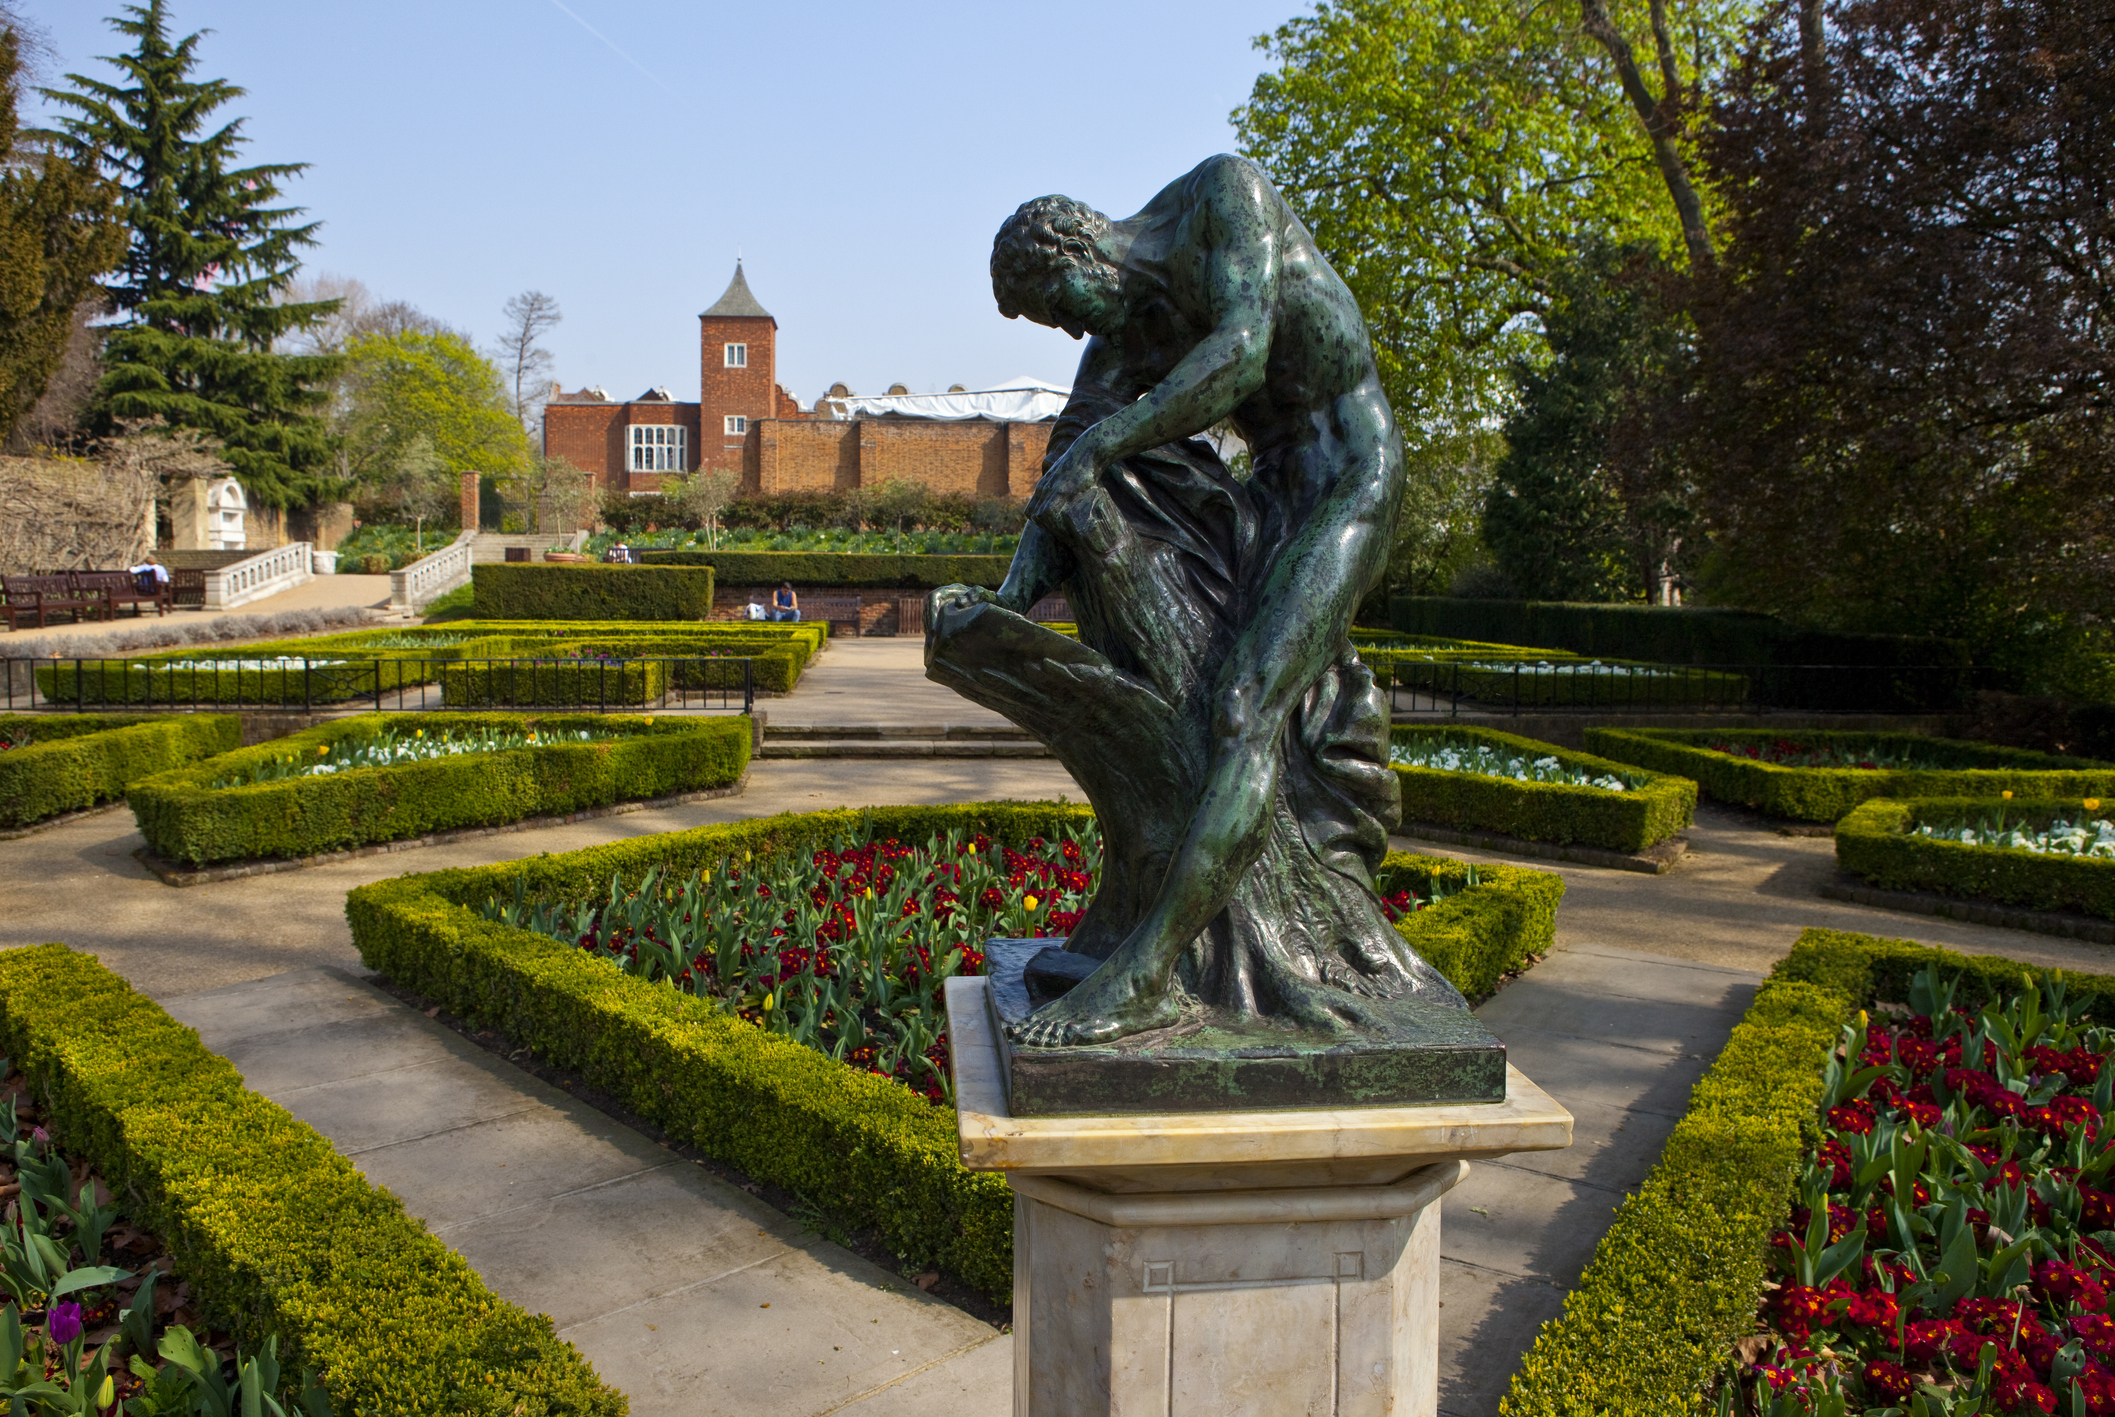 Holland Park in London featuring flowers, shrubs and a statue. Photograph by Chris Dorney